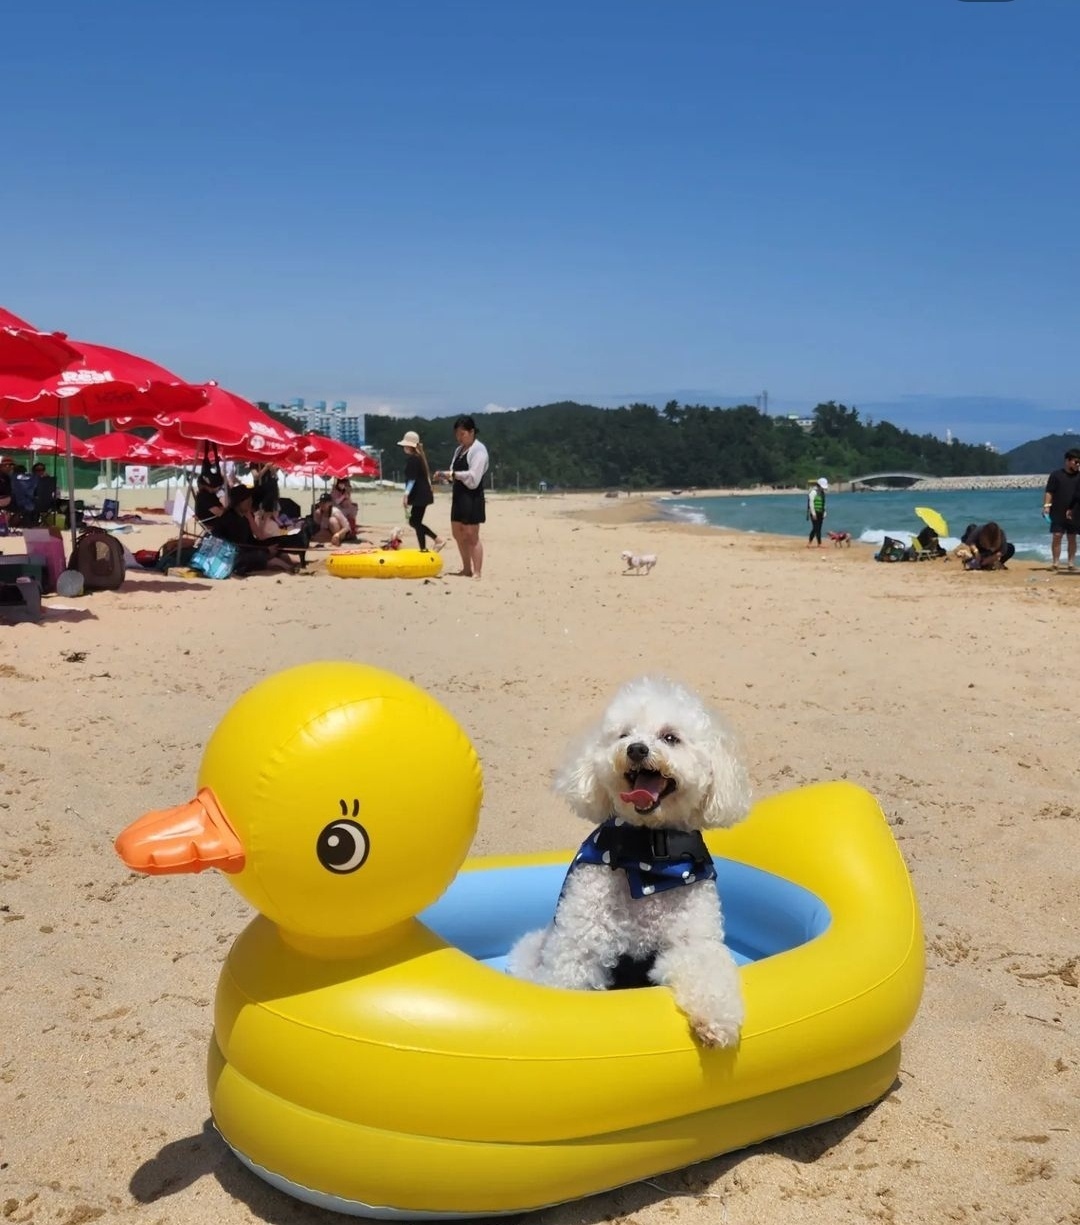 Mango the poodle visits Meong Beach in Gangwon Province on July 9. (Courtesy of Lee)